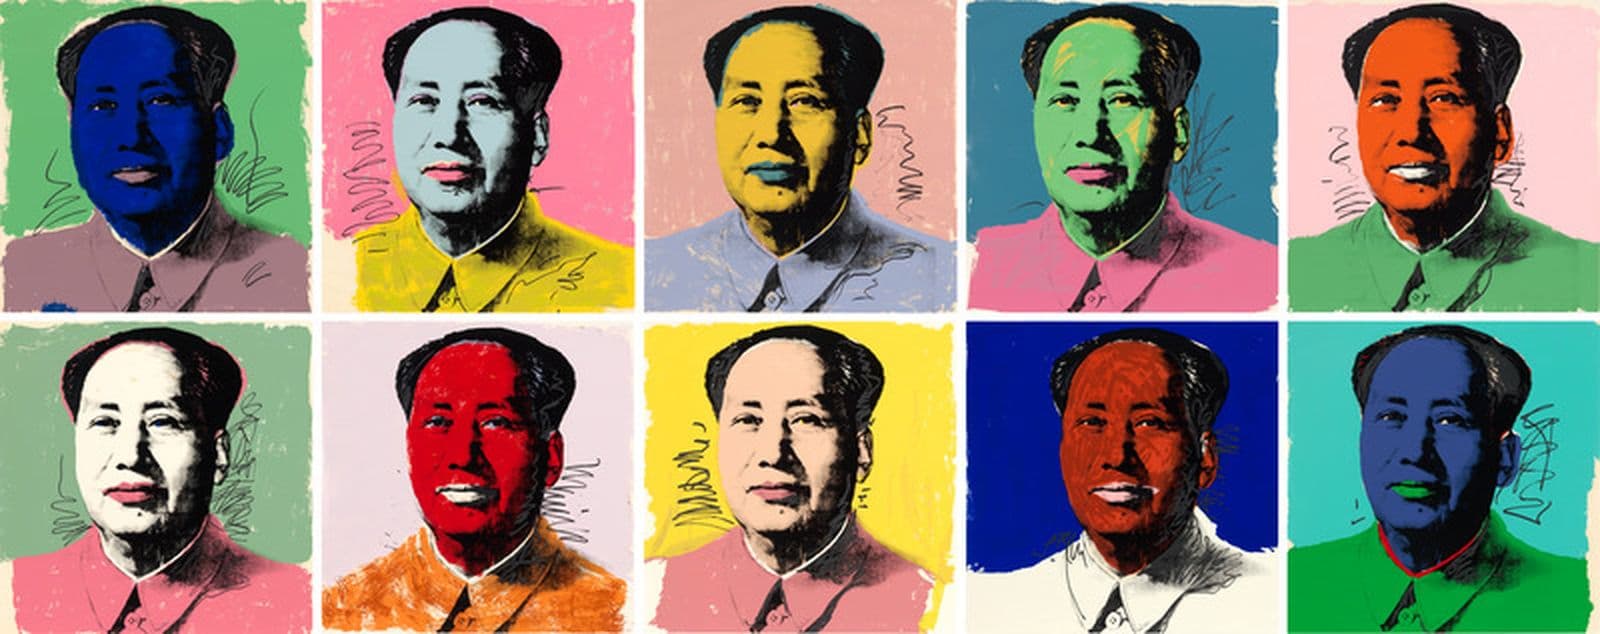 A 6x2 grid of images of Mao Zedong in different colourways